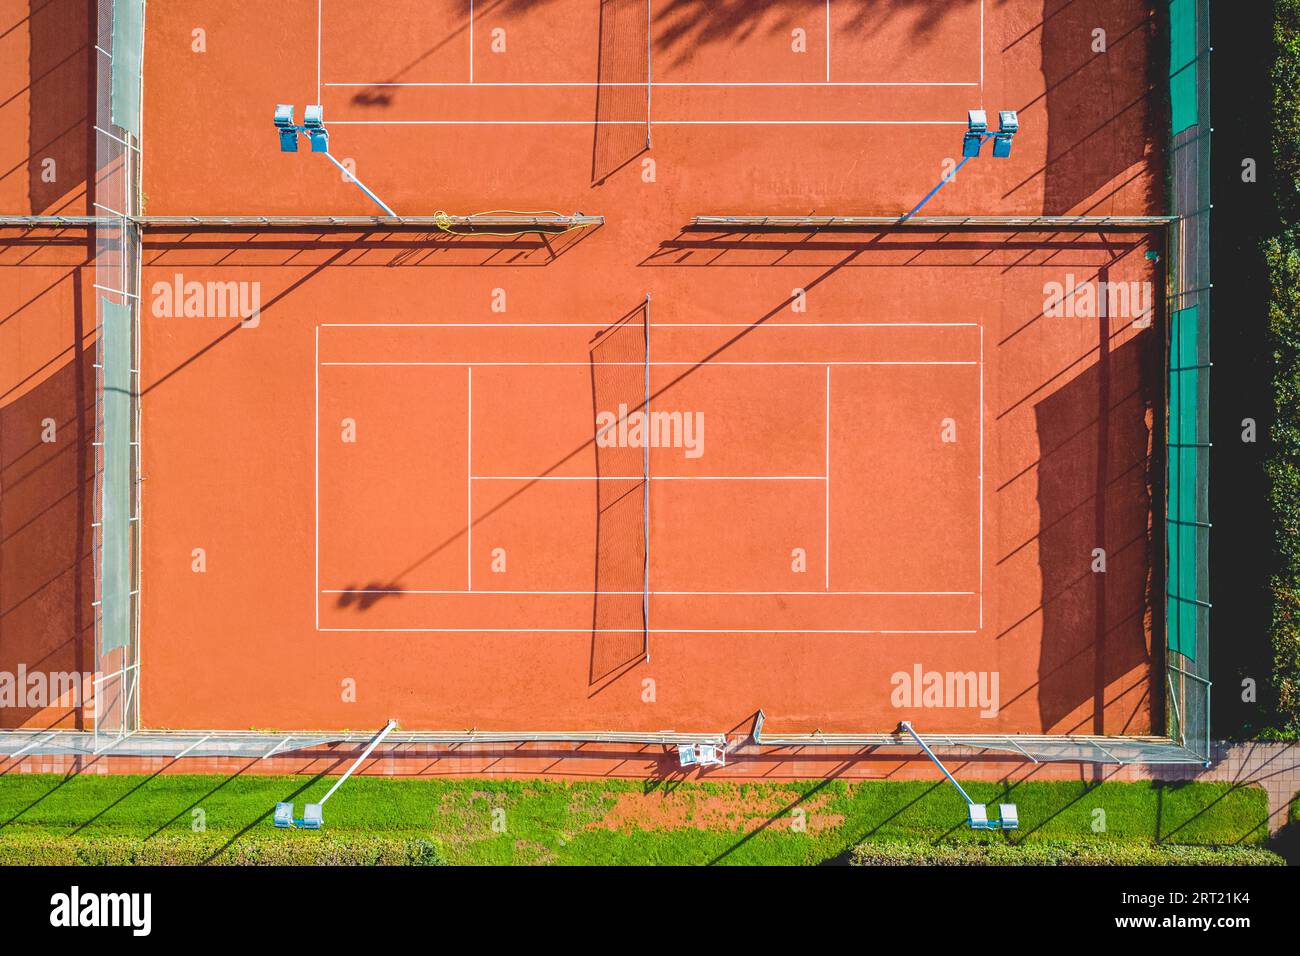 Aerial view of a single red clay tennis court without players Stock Photo